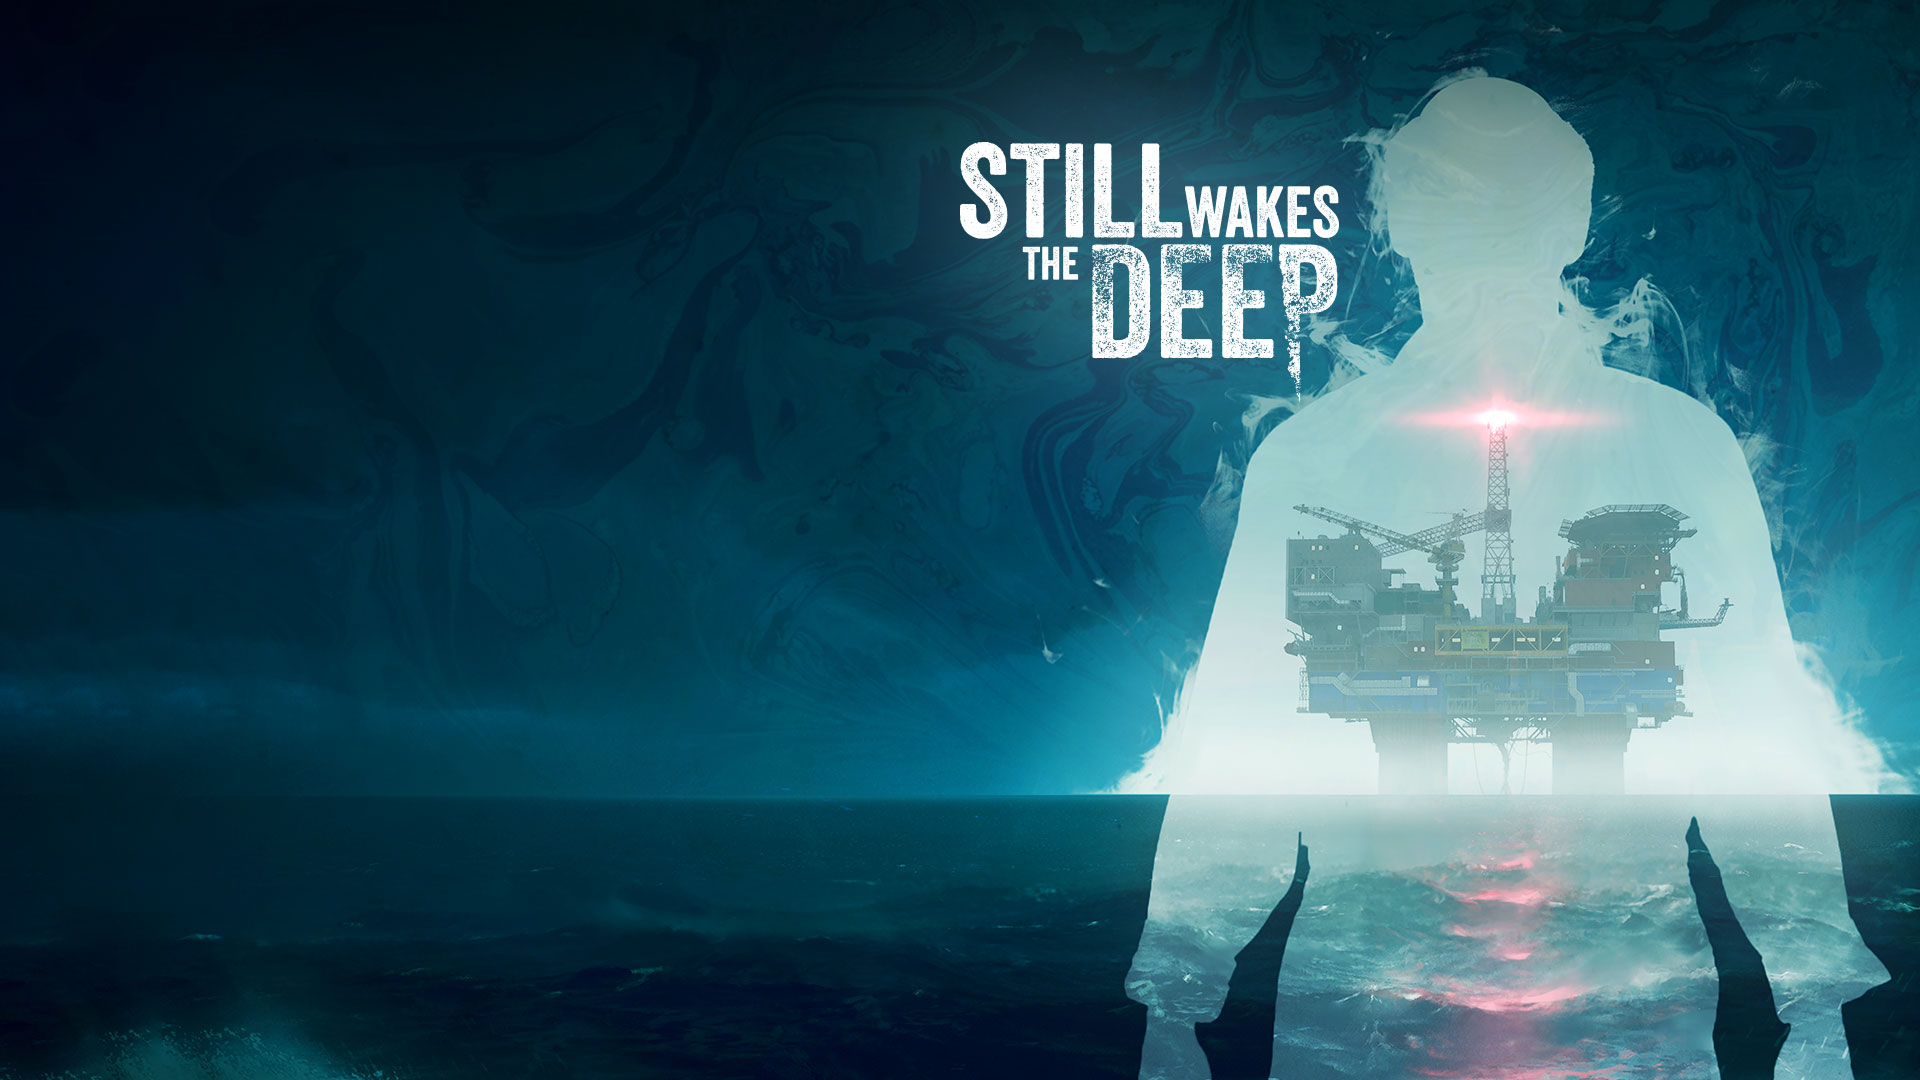 Still Wakes the Deep has a never-before-seen setting for a horror game.